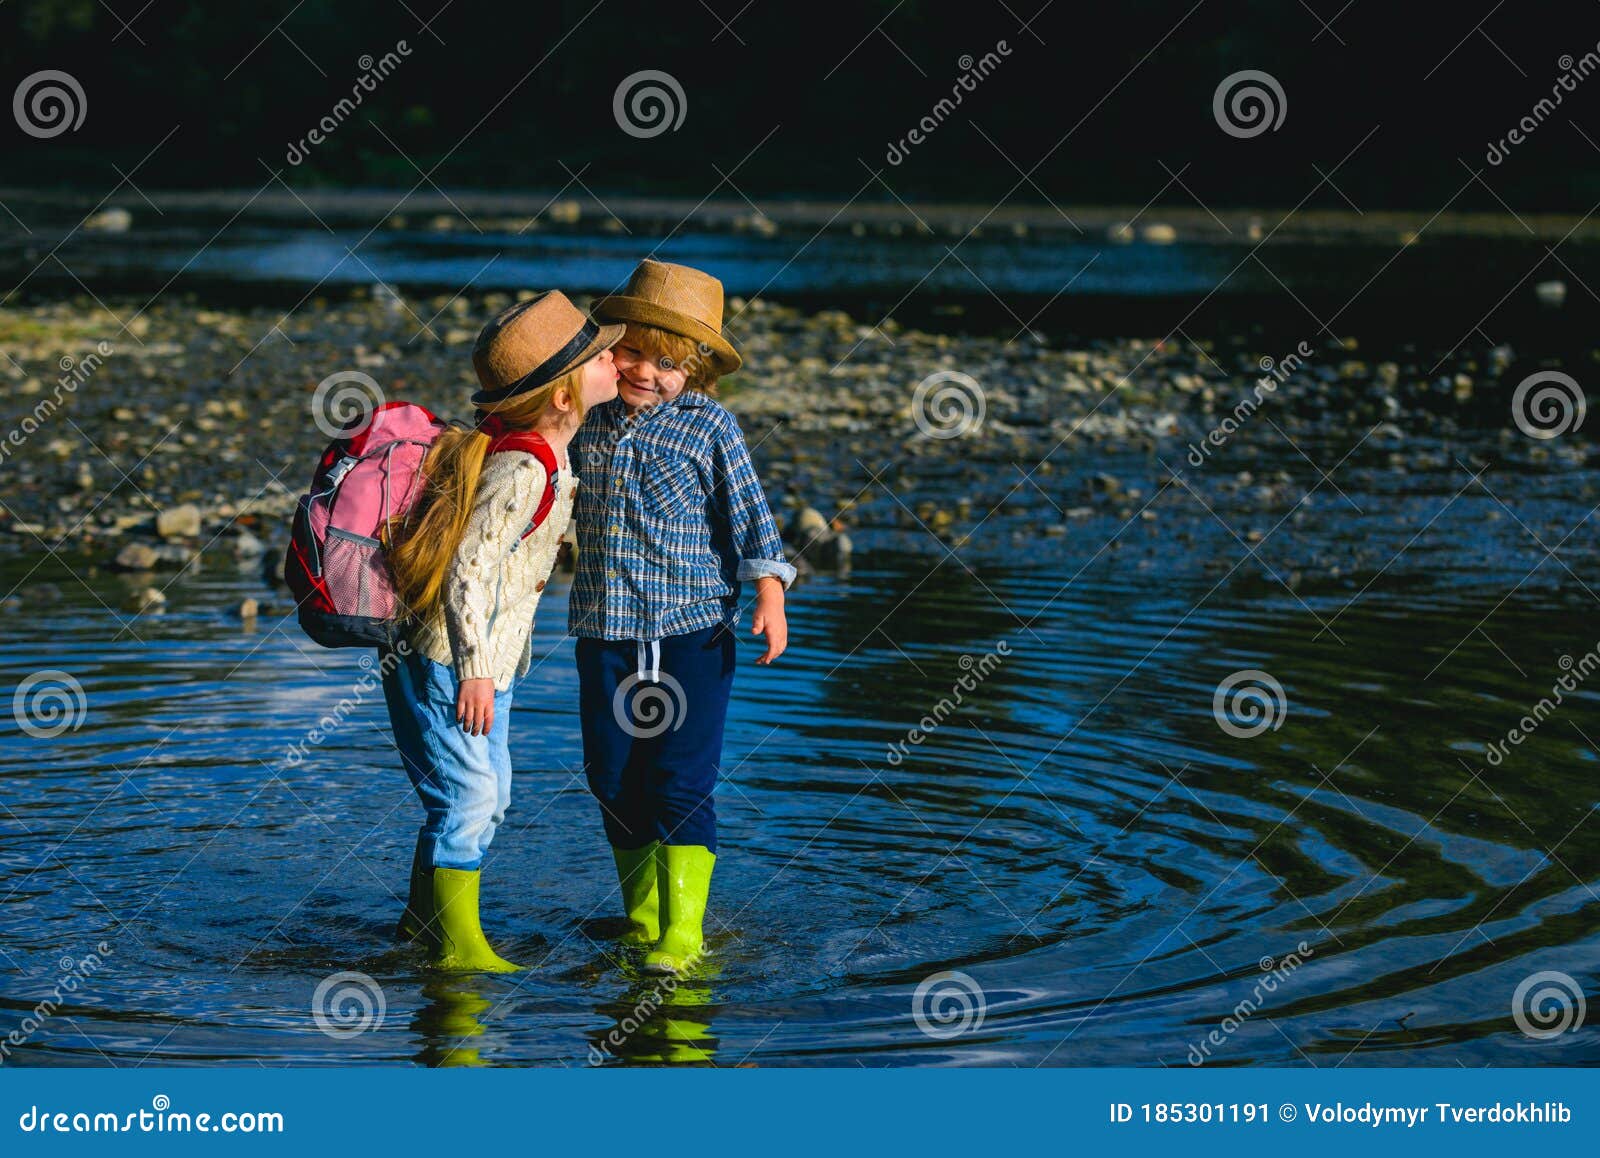 Kids Kissing. Summertime. Little Couple in Love Kissing and Enjoying a ...